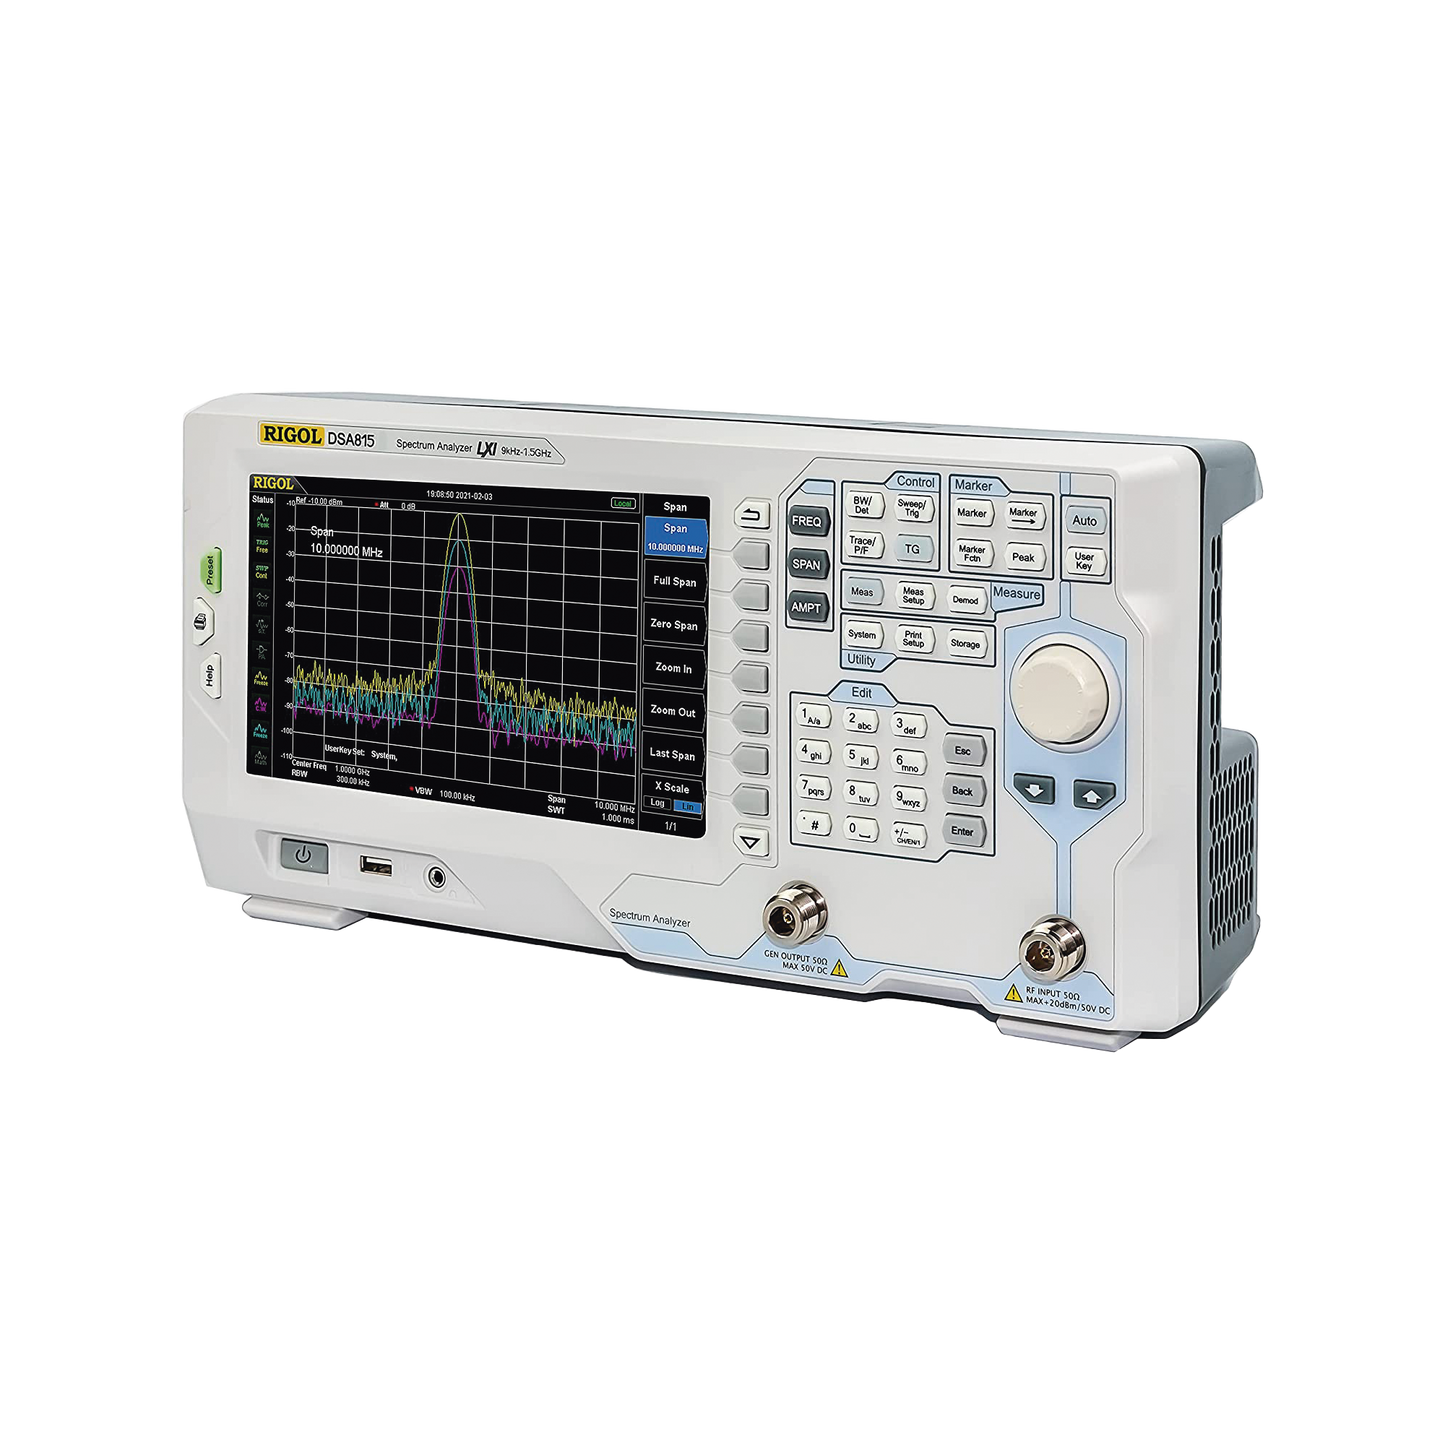 9 kHz to 1.5 GHz Spectrum Analyzer  with Preamplifier and Tracking Generator.